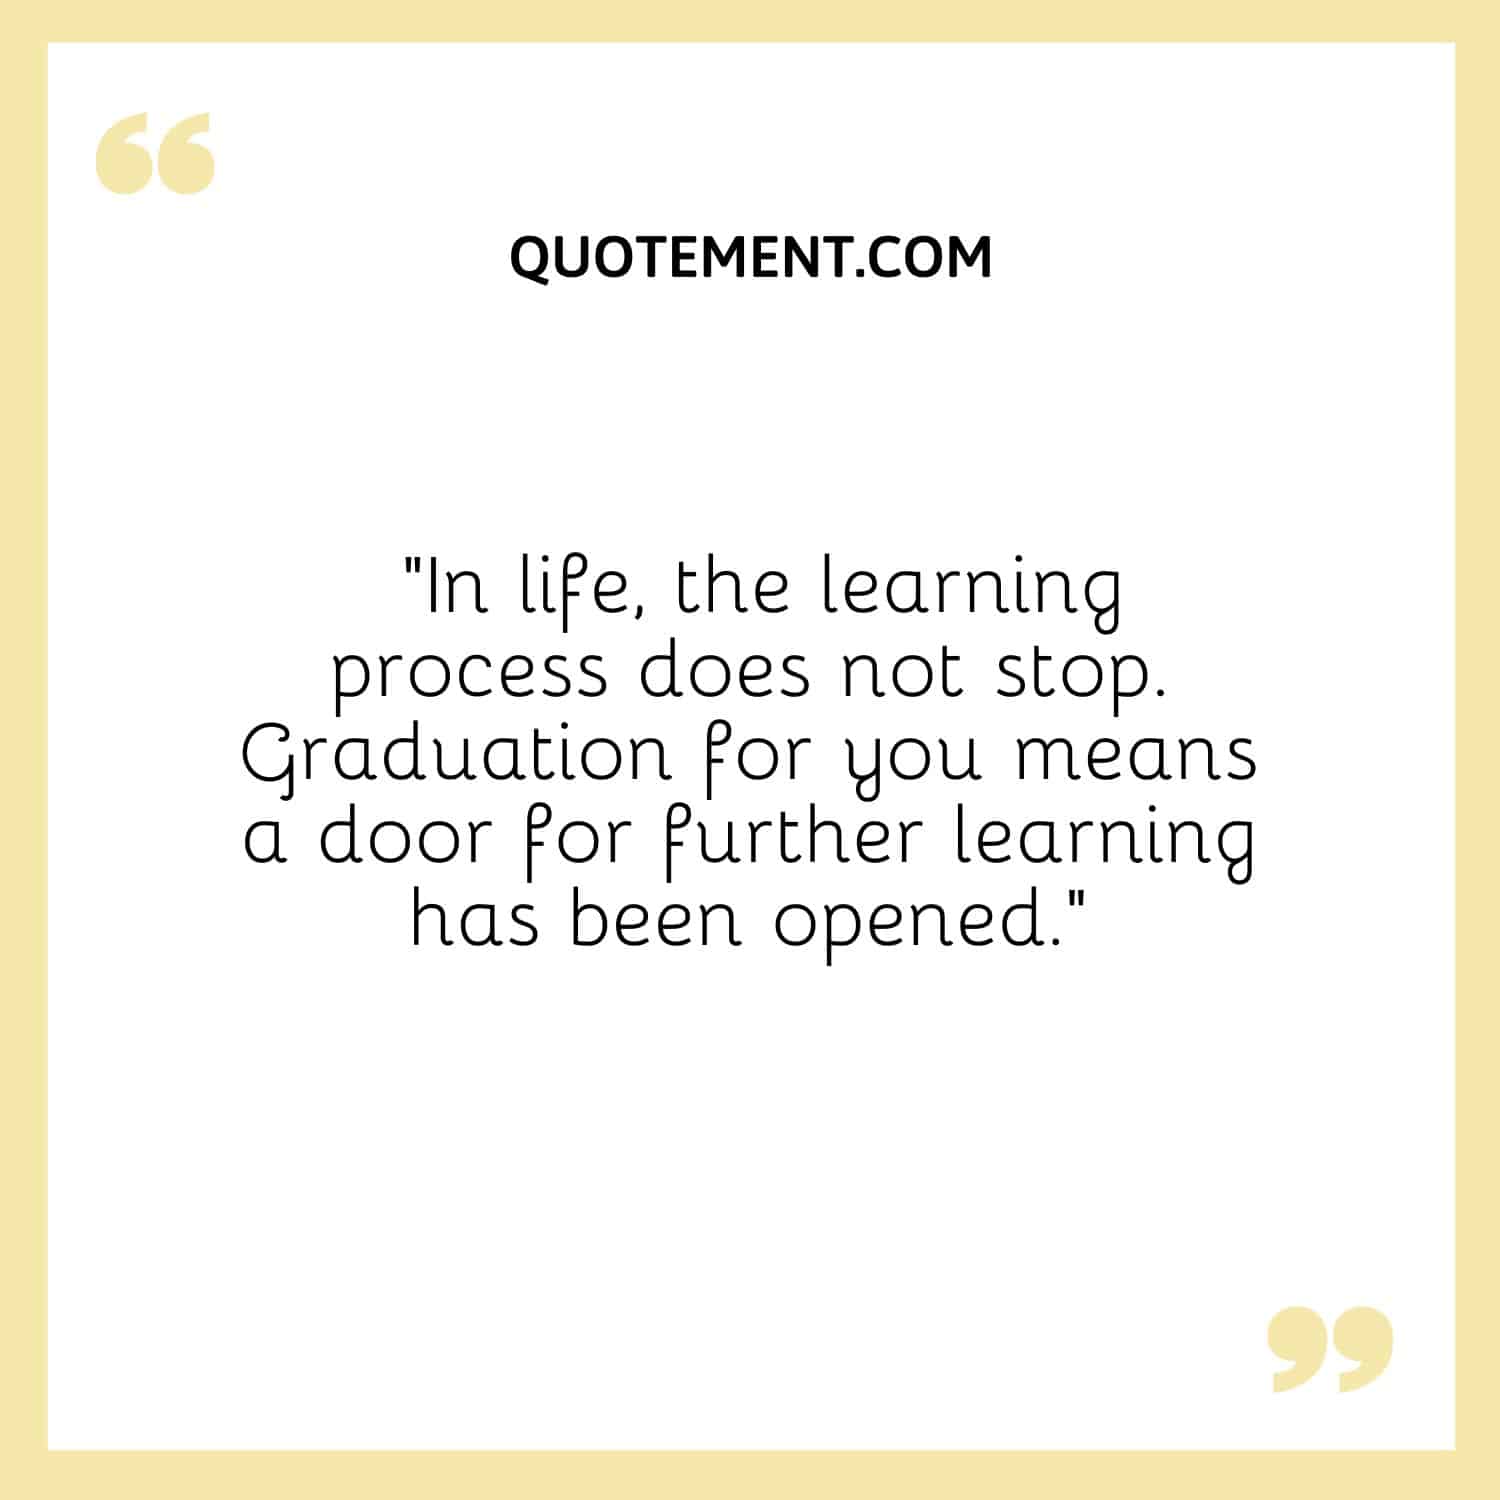 “In life, the learning process does not stop. Graduation for you means a door for further learning has been opened.”